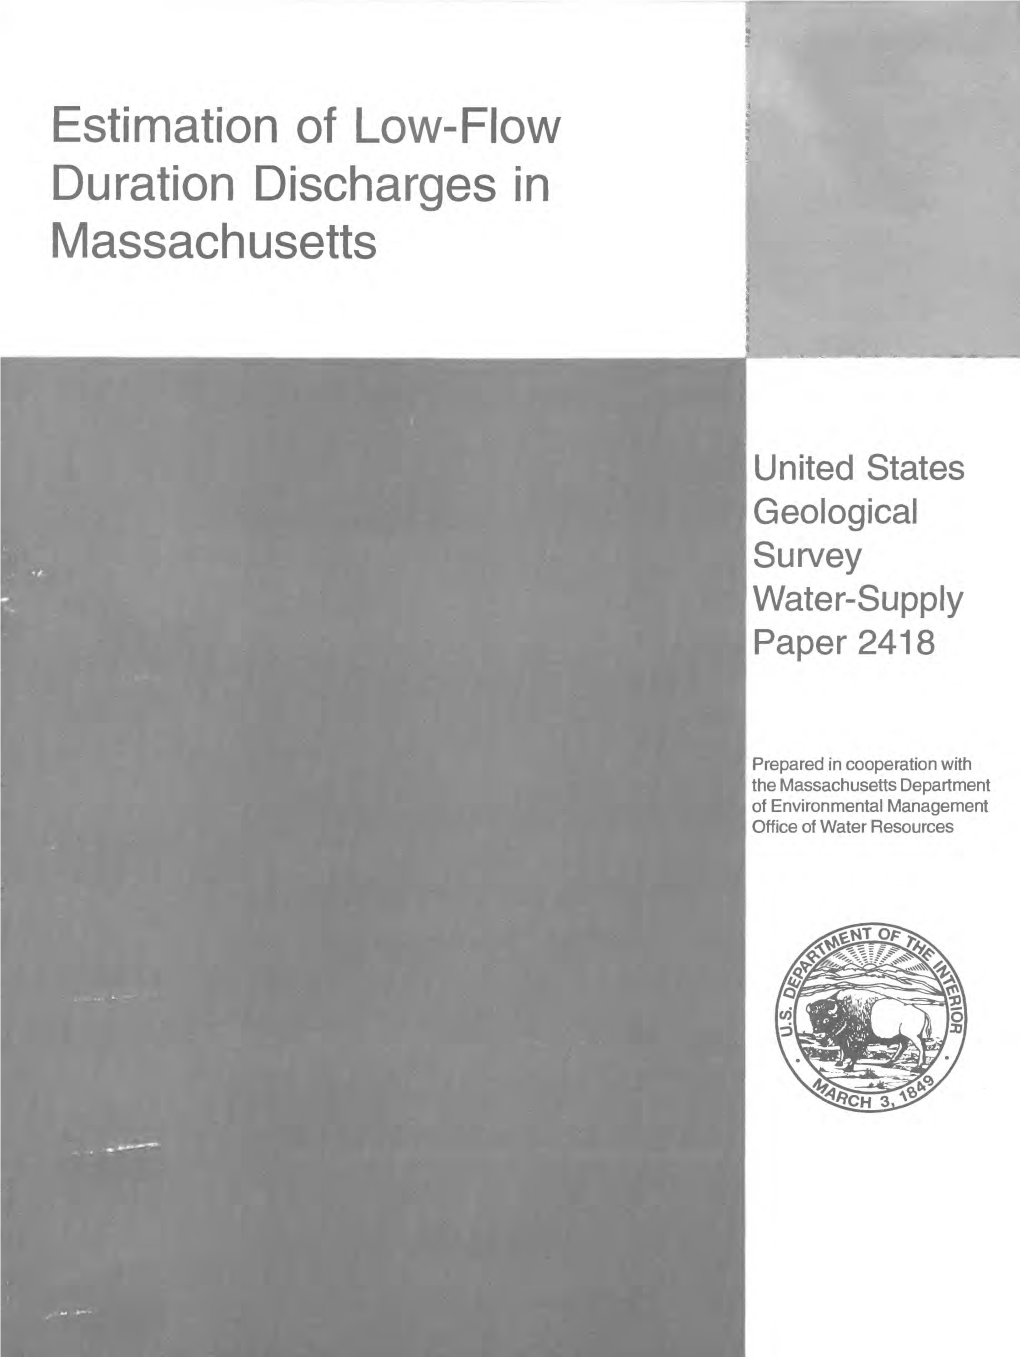 Estimation of Low-Flow Duration Discharges in Massachusetts